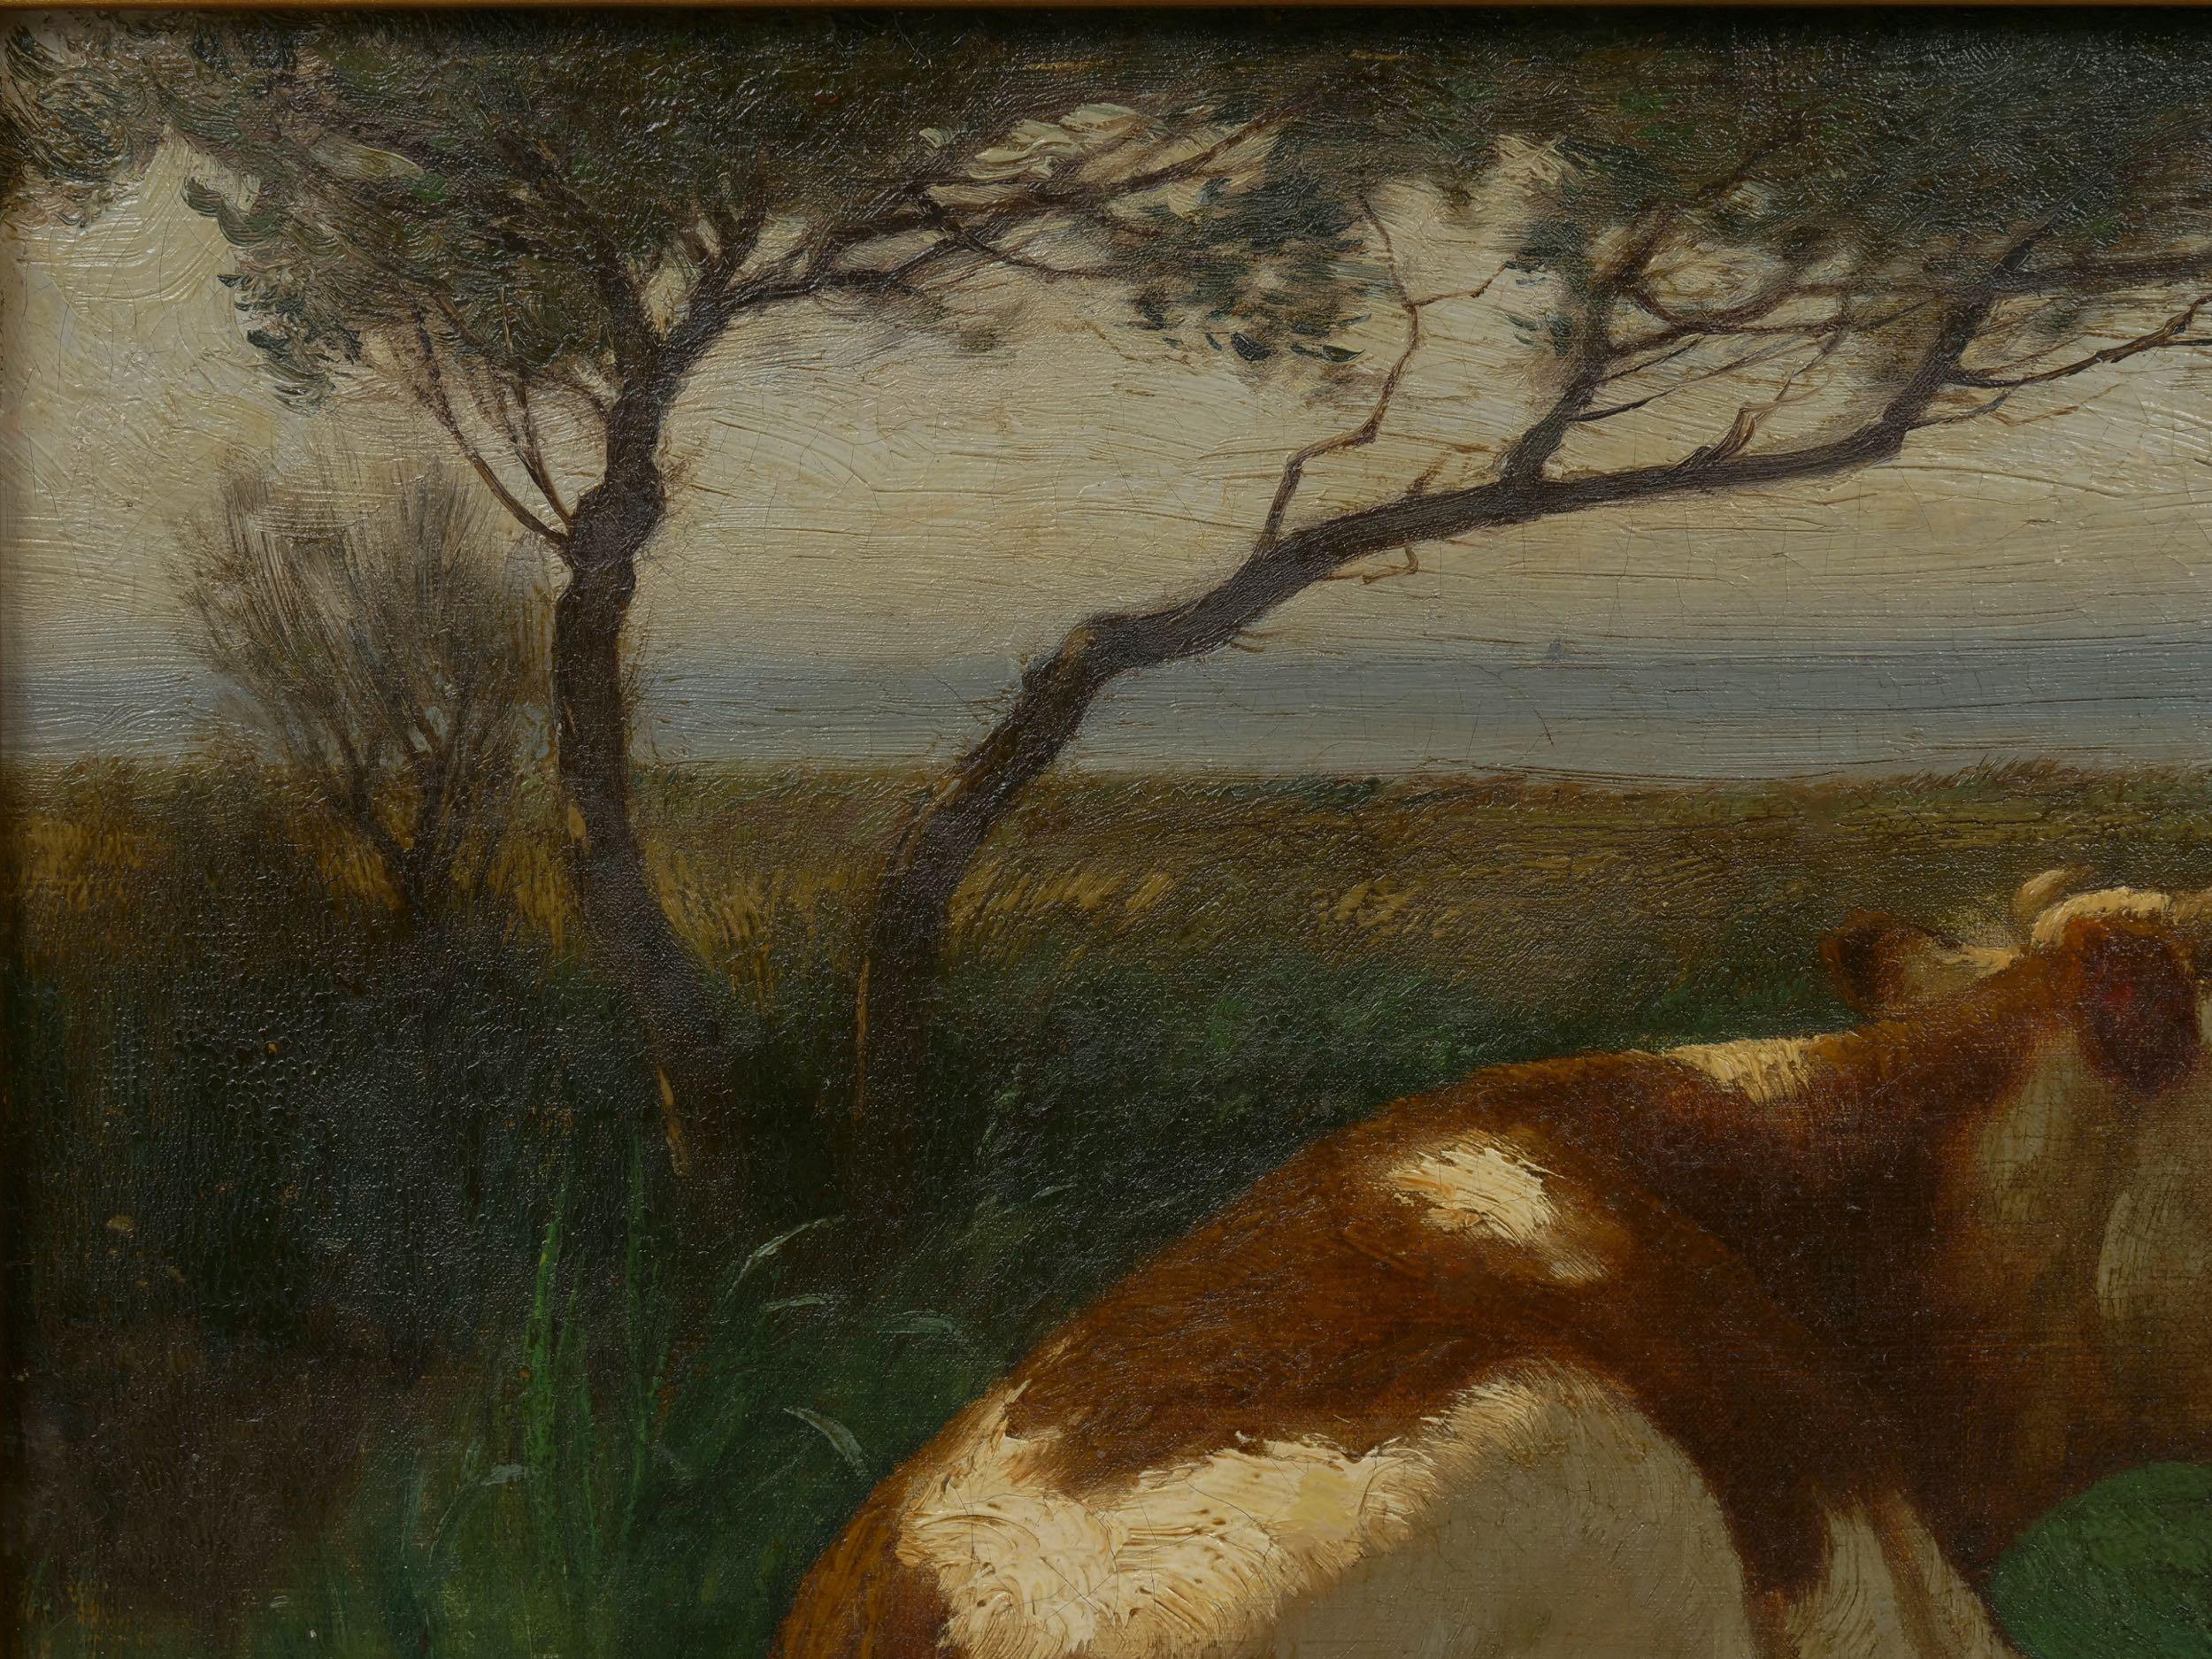 “Landscape of a Resting Bull” Oil Painting by John Carleton Wiggins 2